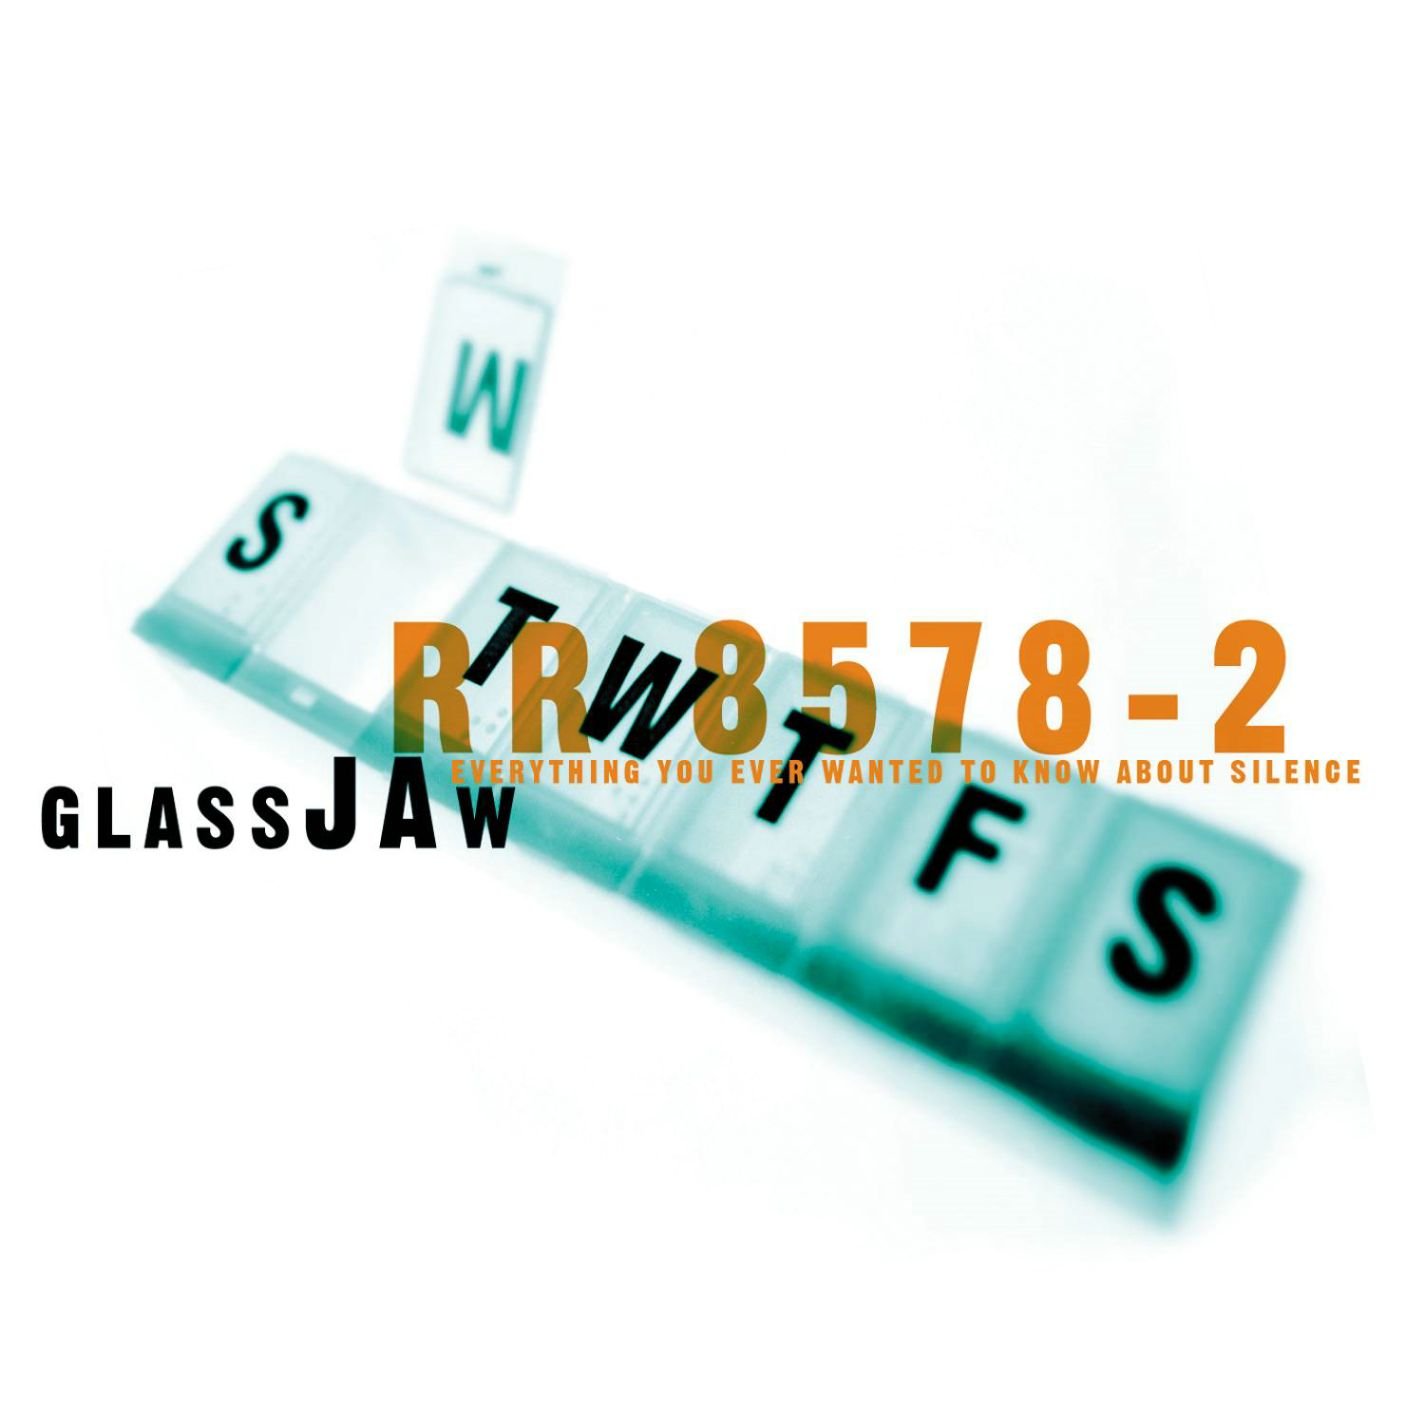 Glassjaw-Everything You Ever Wanted To Know About Silence-Remastered-16BIT-WEB-FLAC-2009-VEXED